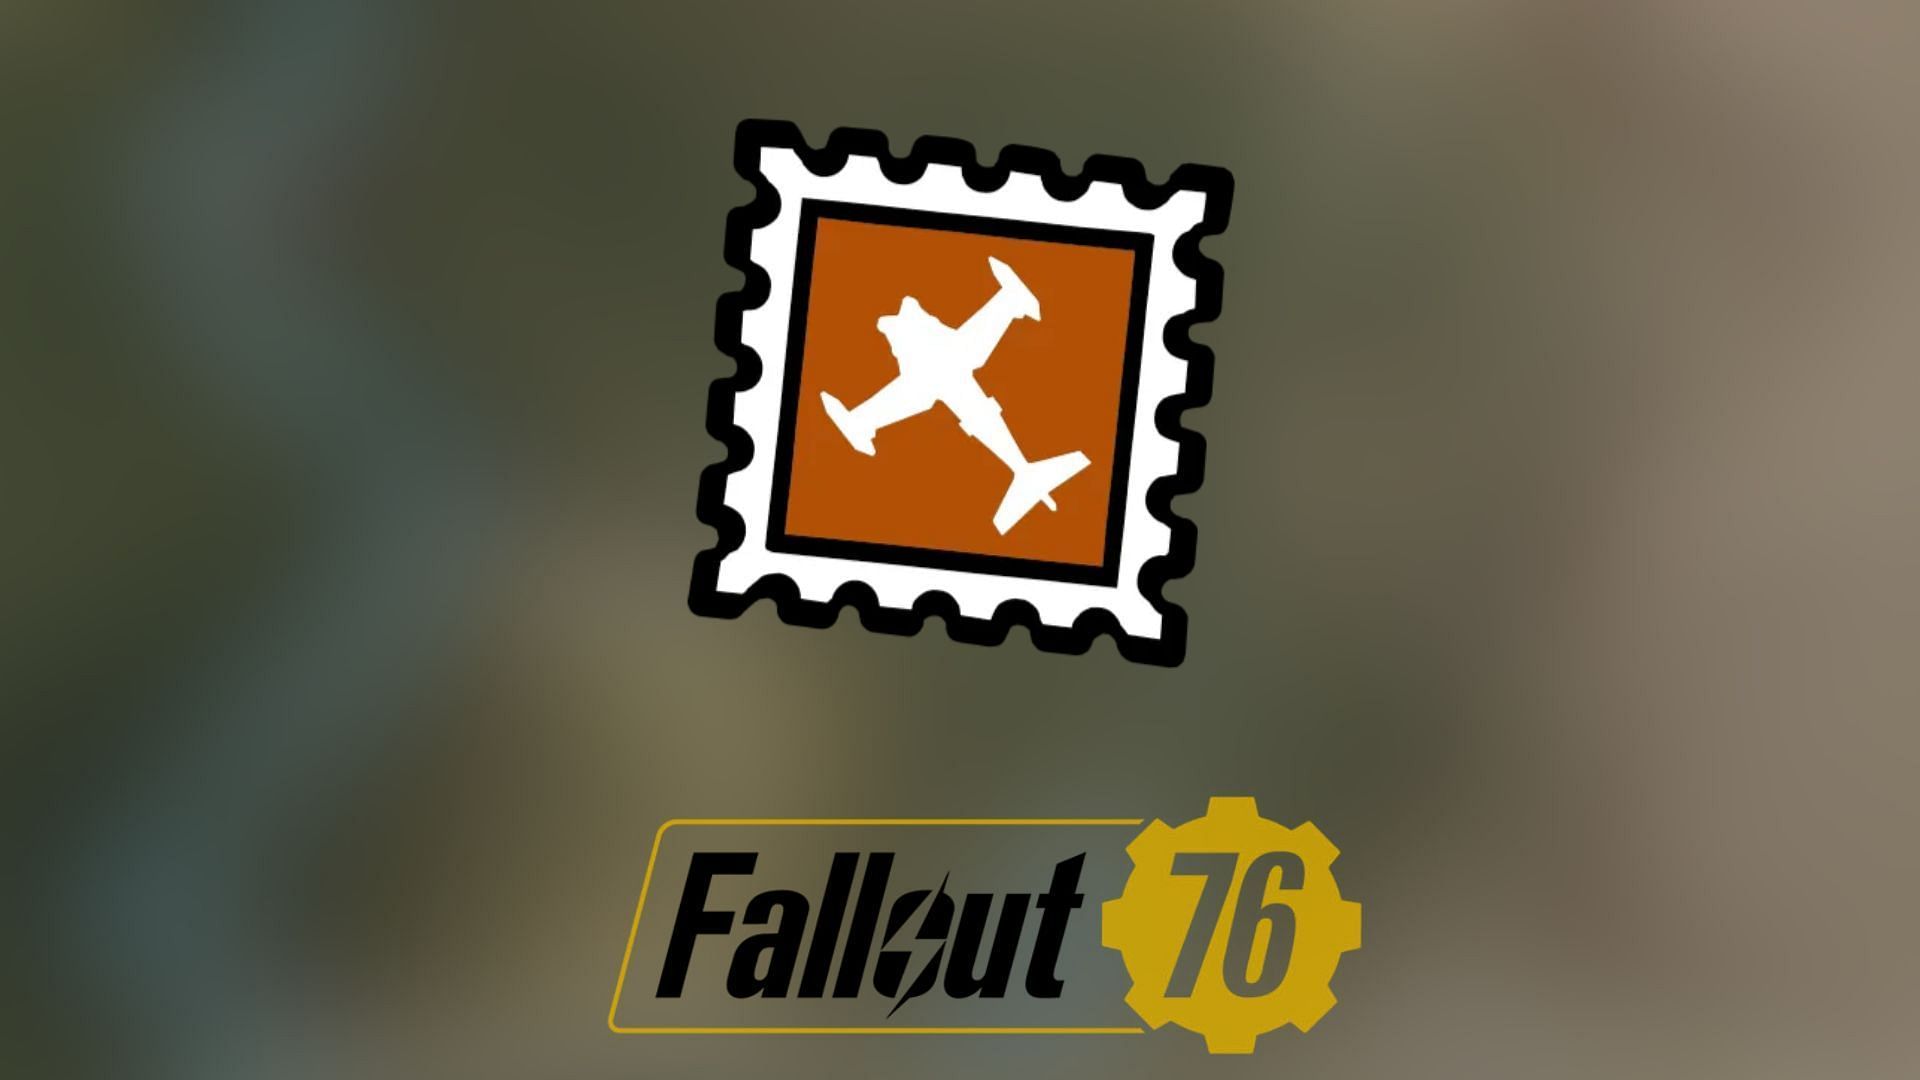 Fallout 76 Stamps and how to get them